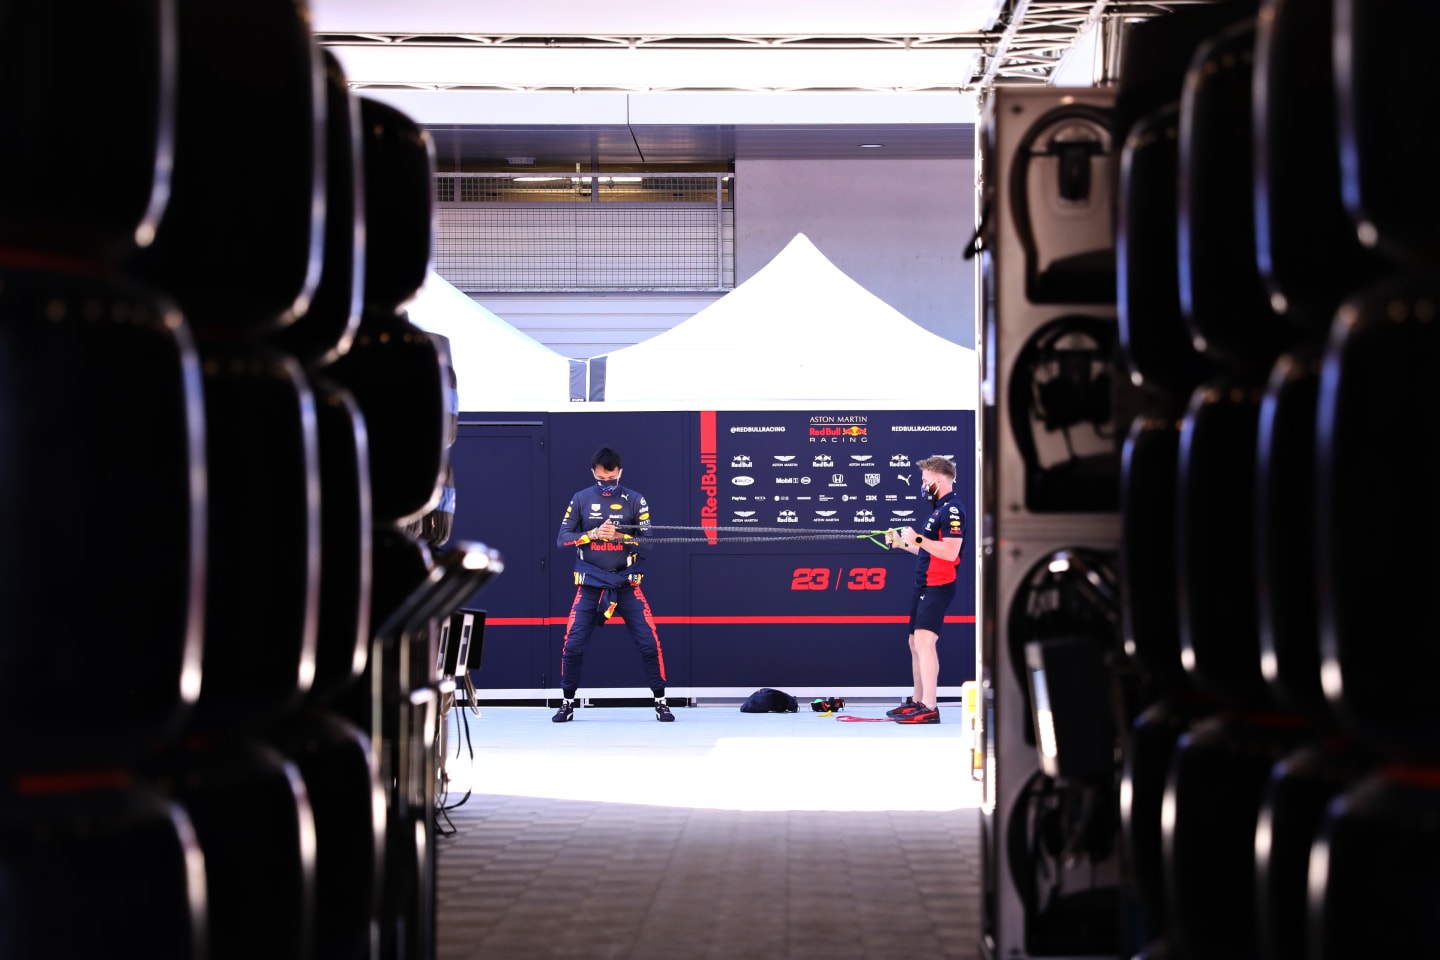 SPIELBERG, AUSTRIA - JULY 10: Alexander Albon of Thailand and Red Bull Racing prepares to drive in the Paddock during practice for the F1 Grand Prix of Styria at Red Bull Ring on July 10, 2020 in Spielberg, Austria. (Photo by Getty Images/Getty Images)